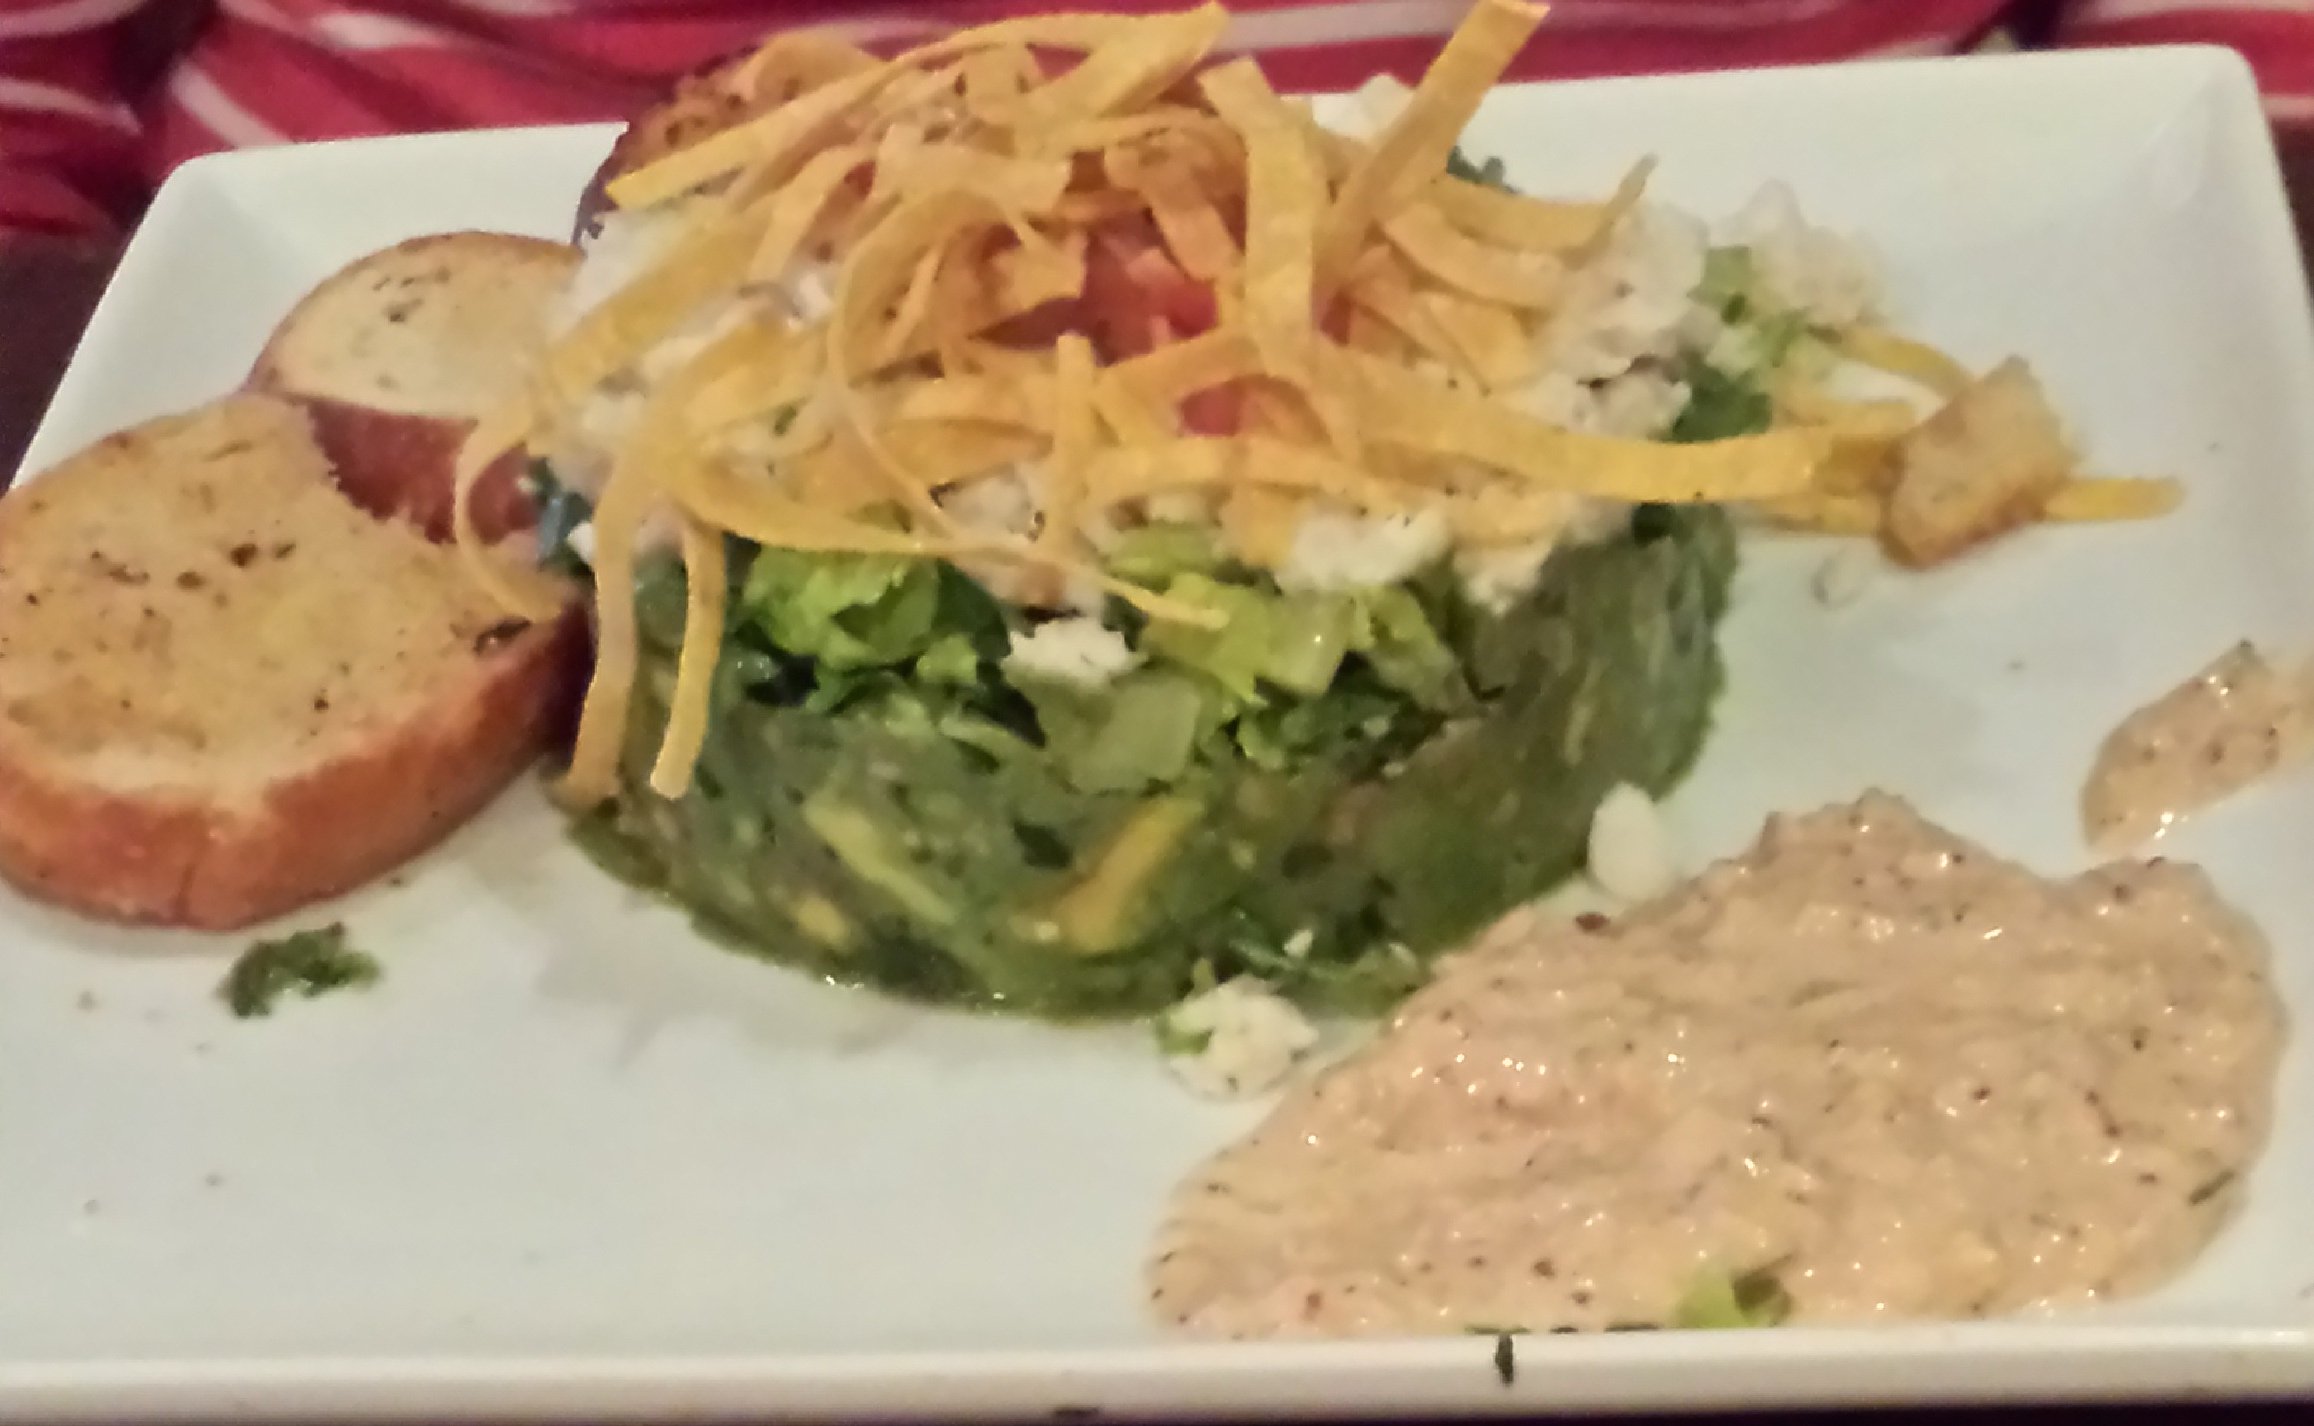 an avocado salad filled with romaine salad topped with crispy chips and plate garnished with tangy dressing